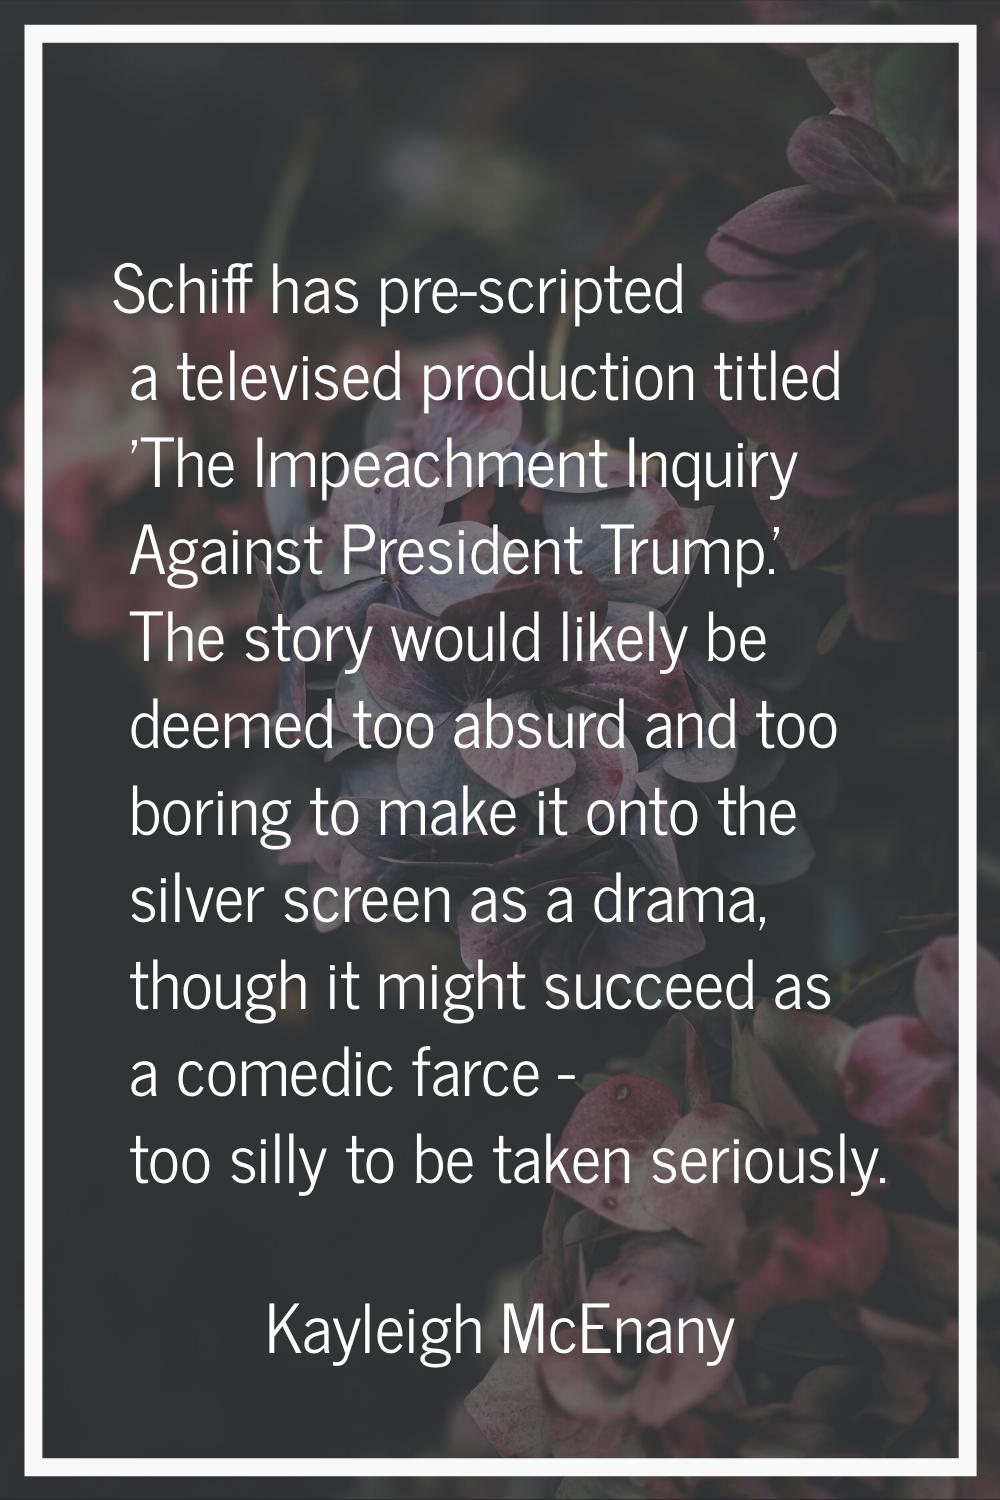 Schiff has pre-scripted a televised production titled 'The Impeachment Inquiry Against President Tr